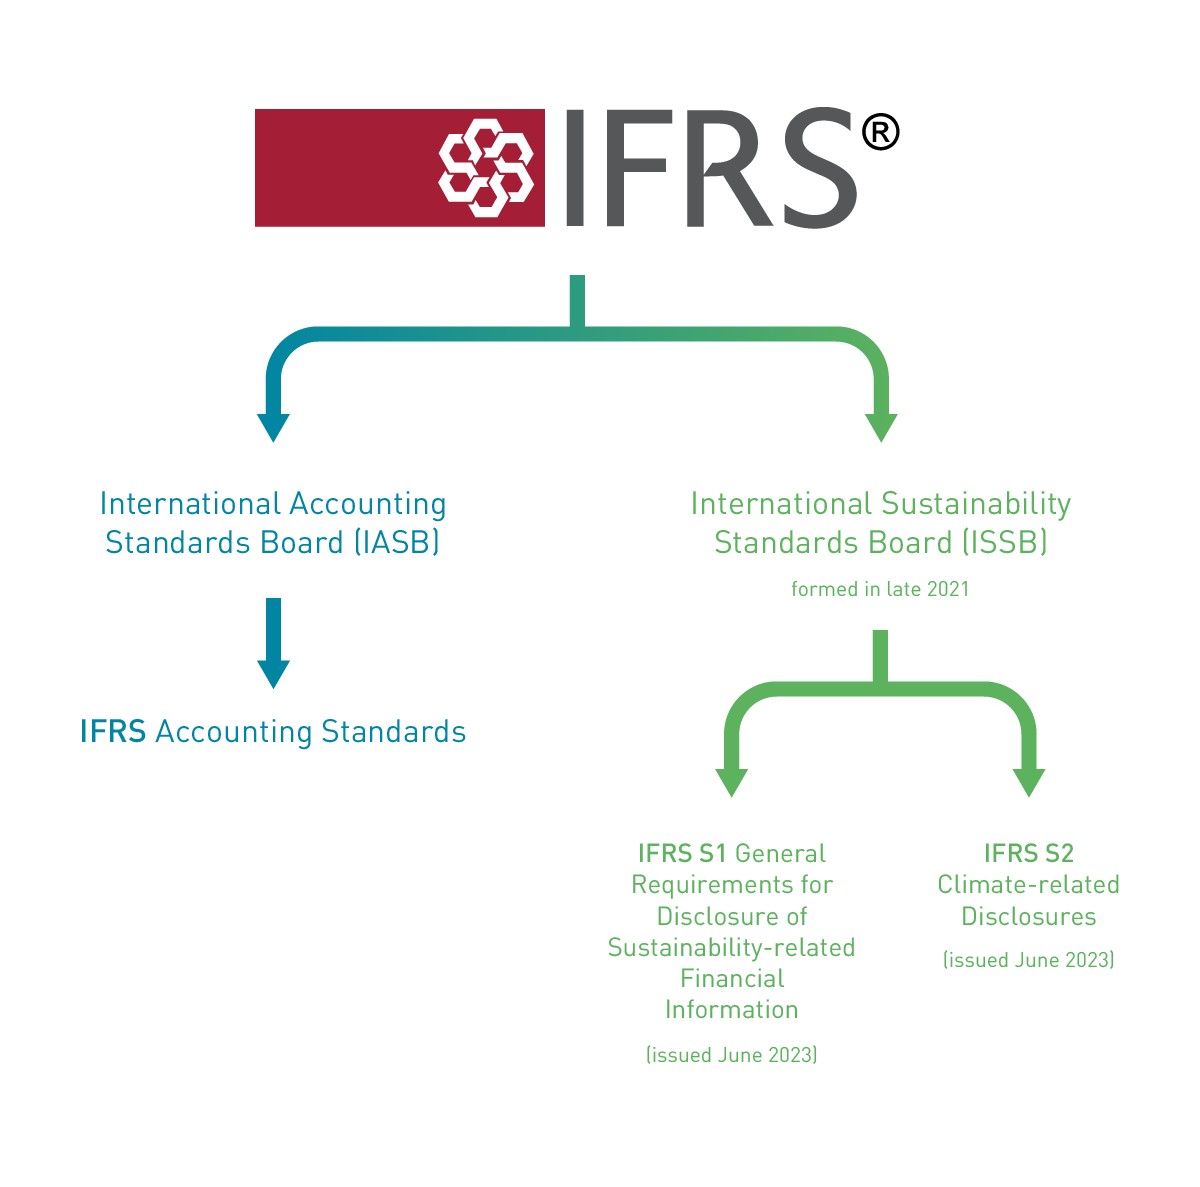 Overview of IFRS structure and associated standards for each standard setting body (IASB and ISSB)